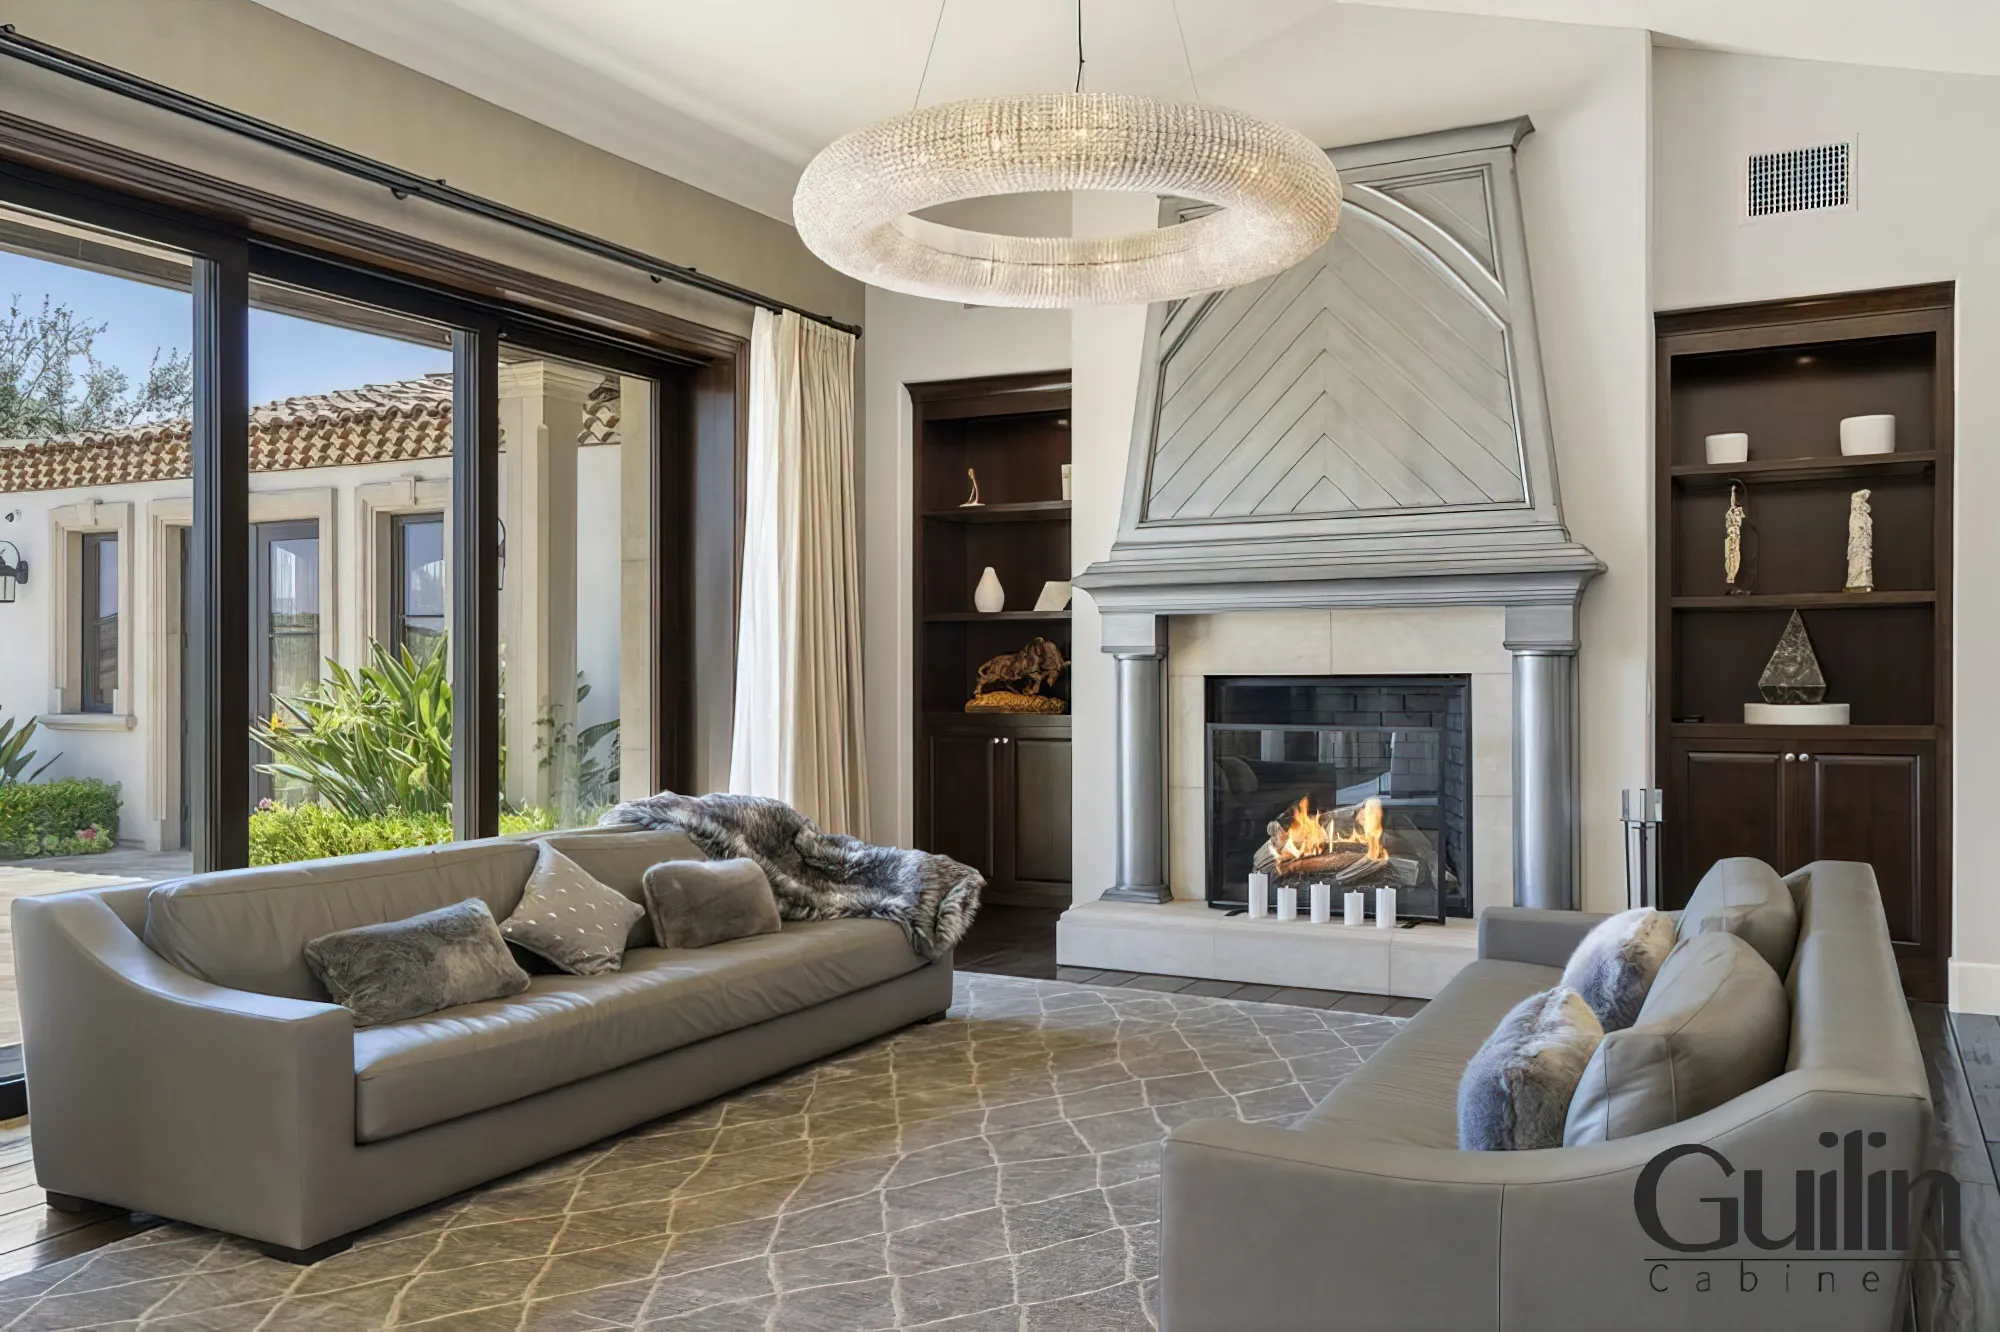 Remodeled General Home With Classic And Luxury Style In Irvine CA Logo